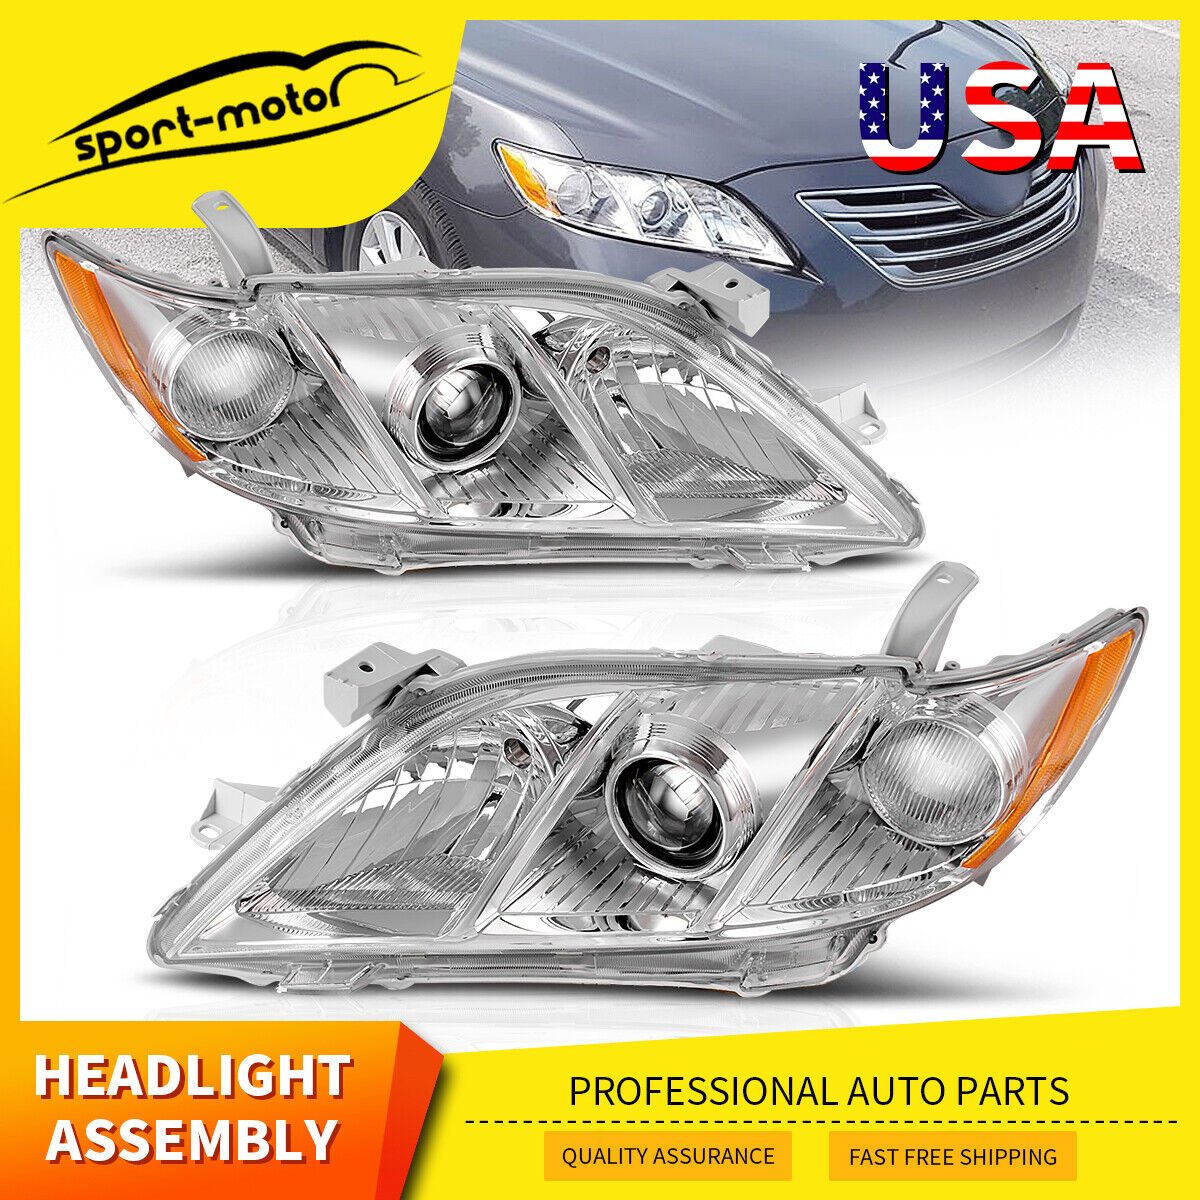 Replacement Projector Headlights Assembly for 2007-2009 Toyota Camry Headlamps